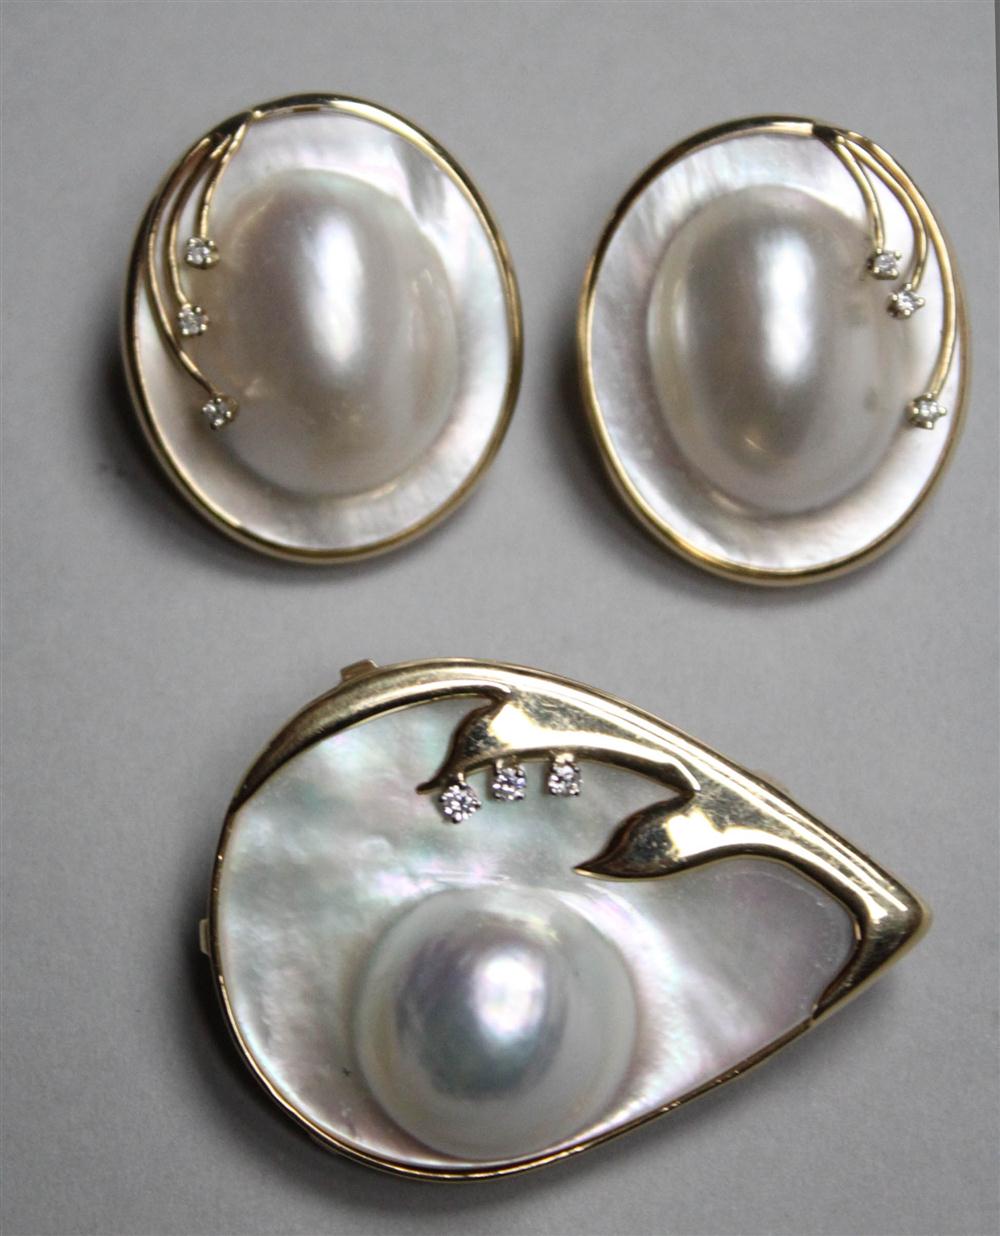 LADY S GOLD PEARL AND DIAMOND EARRINGS 145b7c